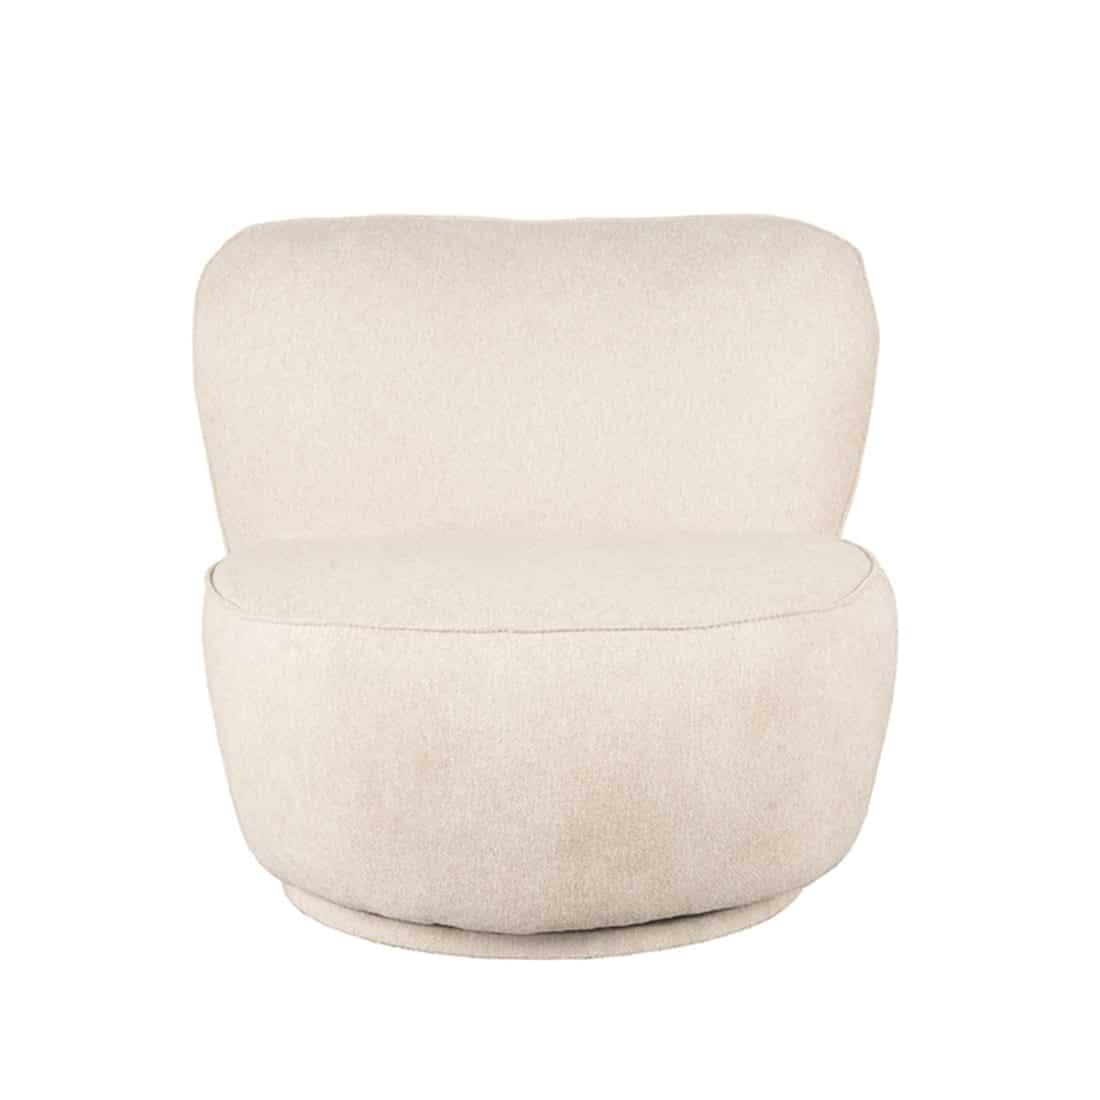 Fauteuil Bunny 8211 Beige 8211 Boucle 8211 Rhb Home Amp Living